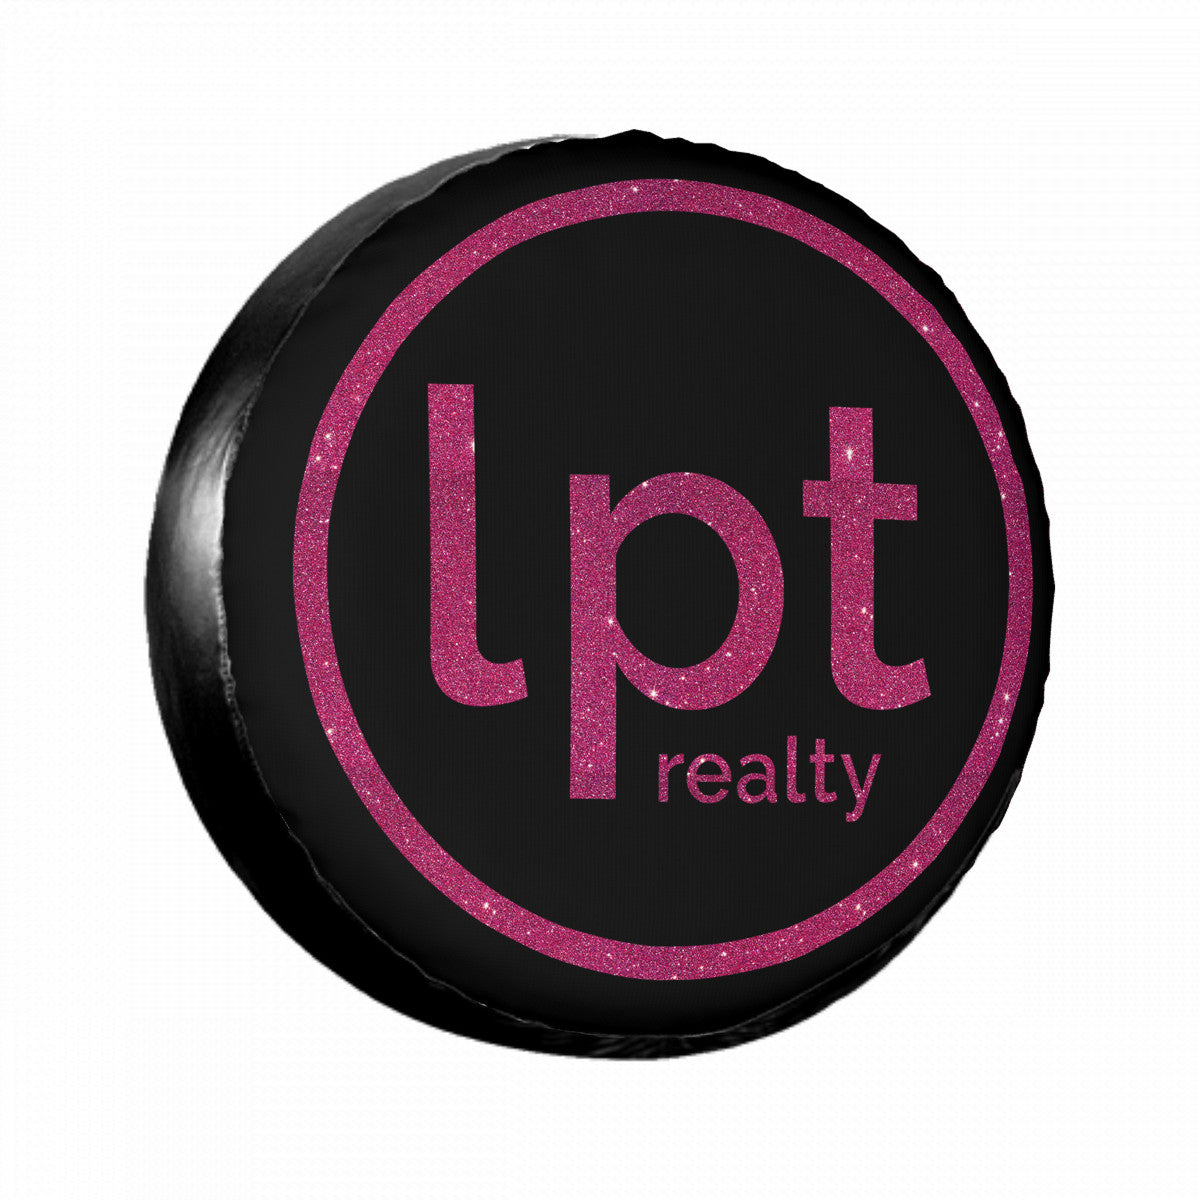 LPT Realty Logo Hot Pink Sparkle - Spare Tire Wheel Cover Sizes 14-17